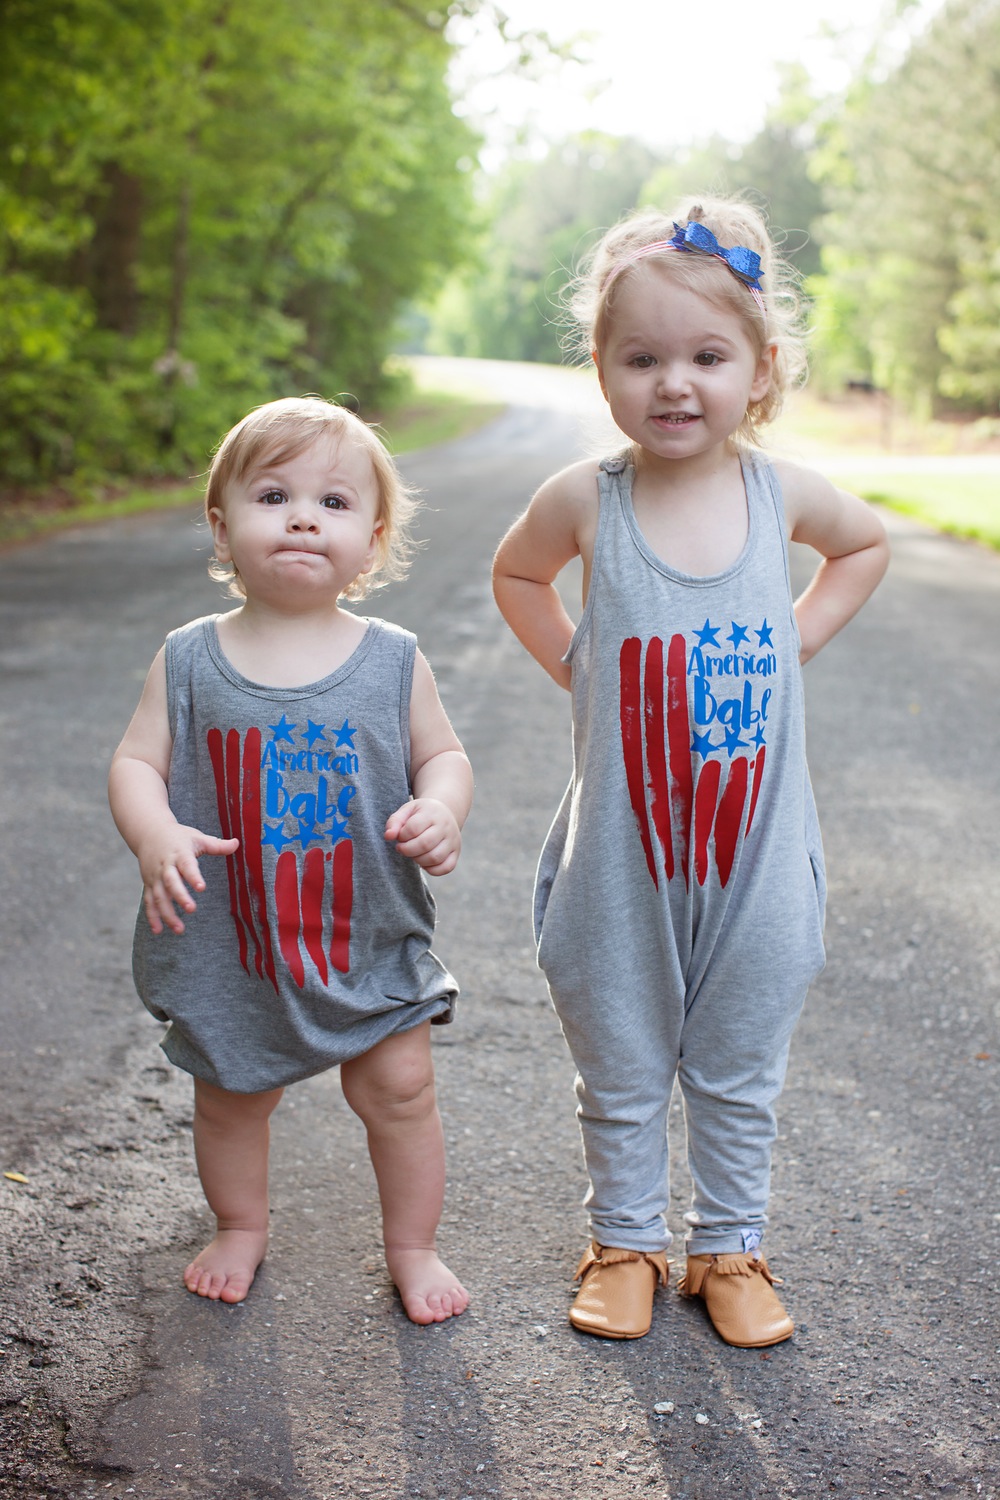 American Babe Romper from Sheady Baby